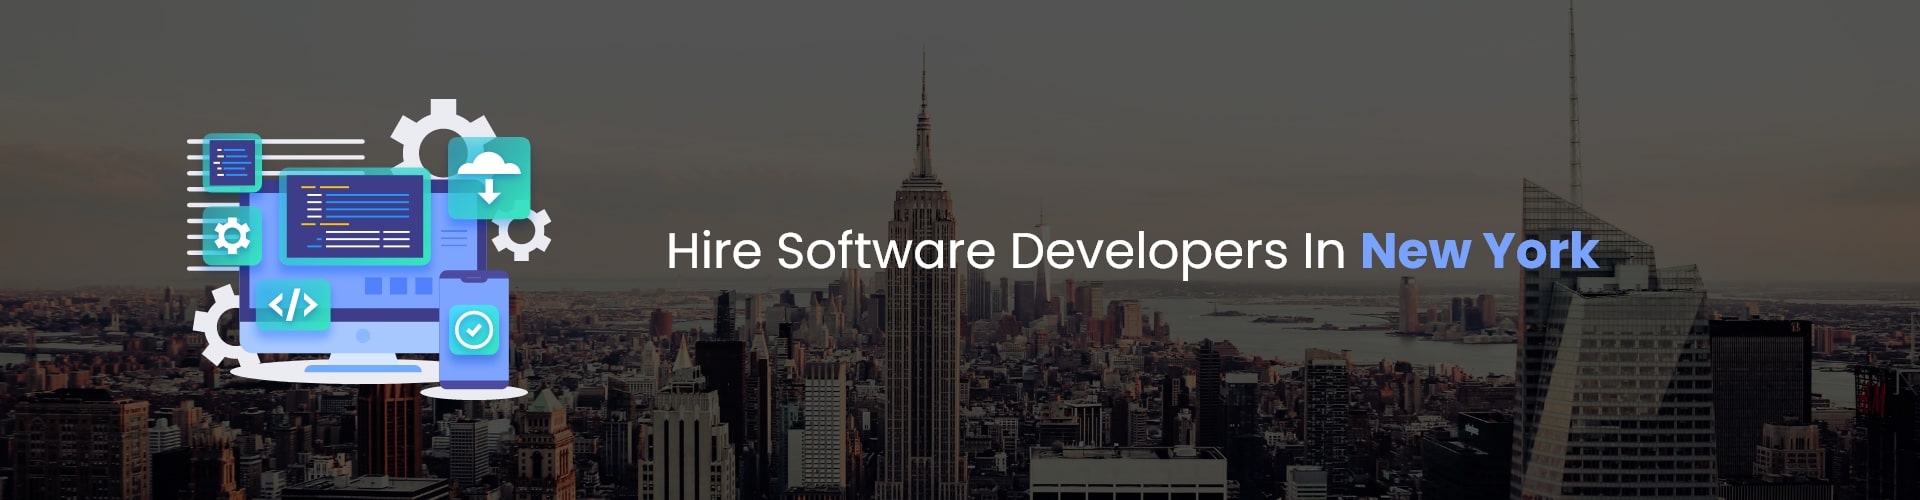 hire software developers in new york